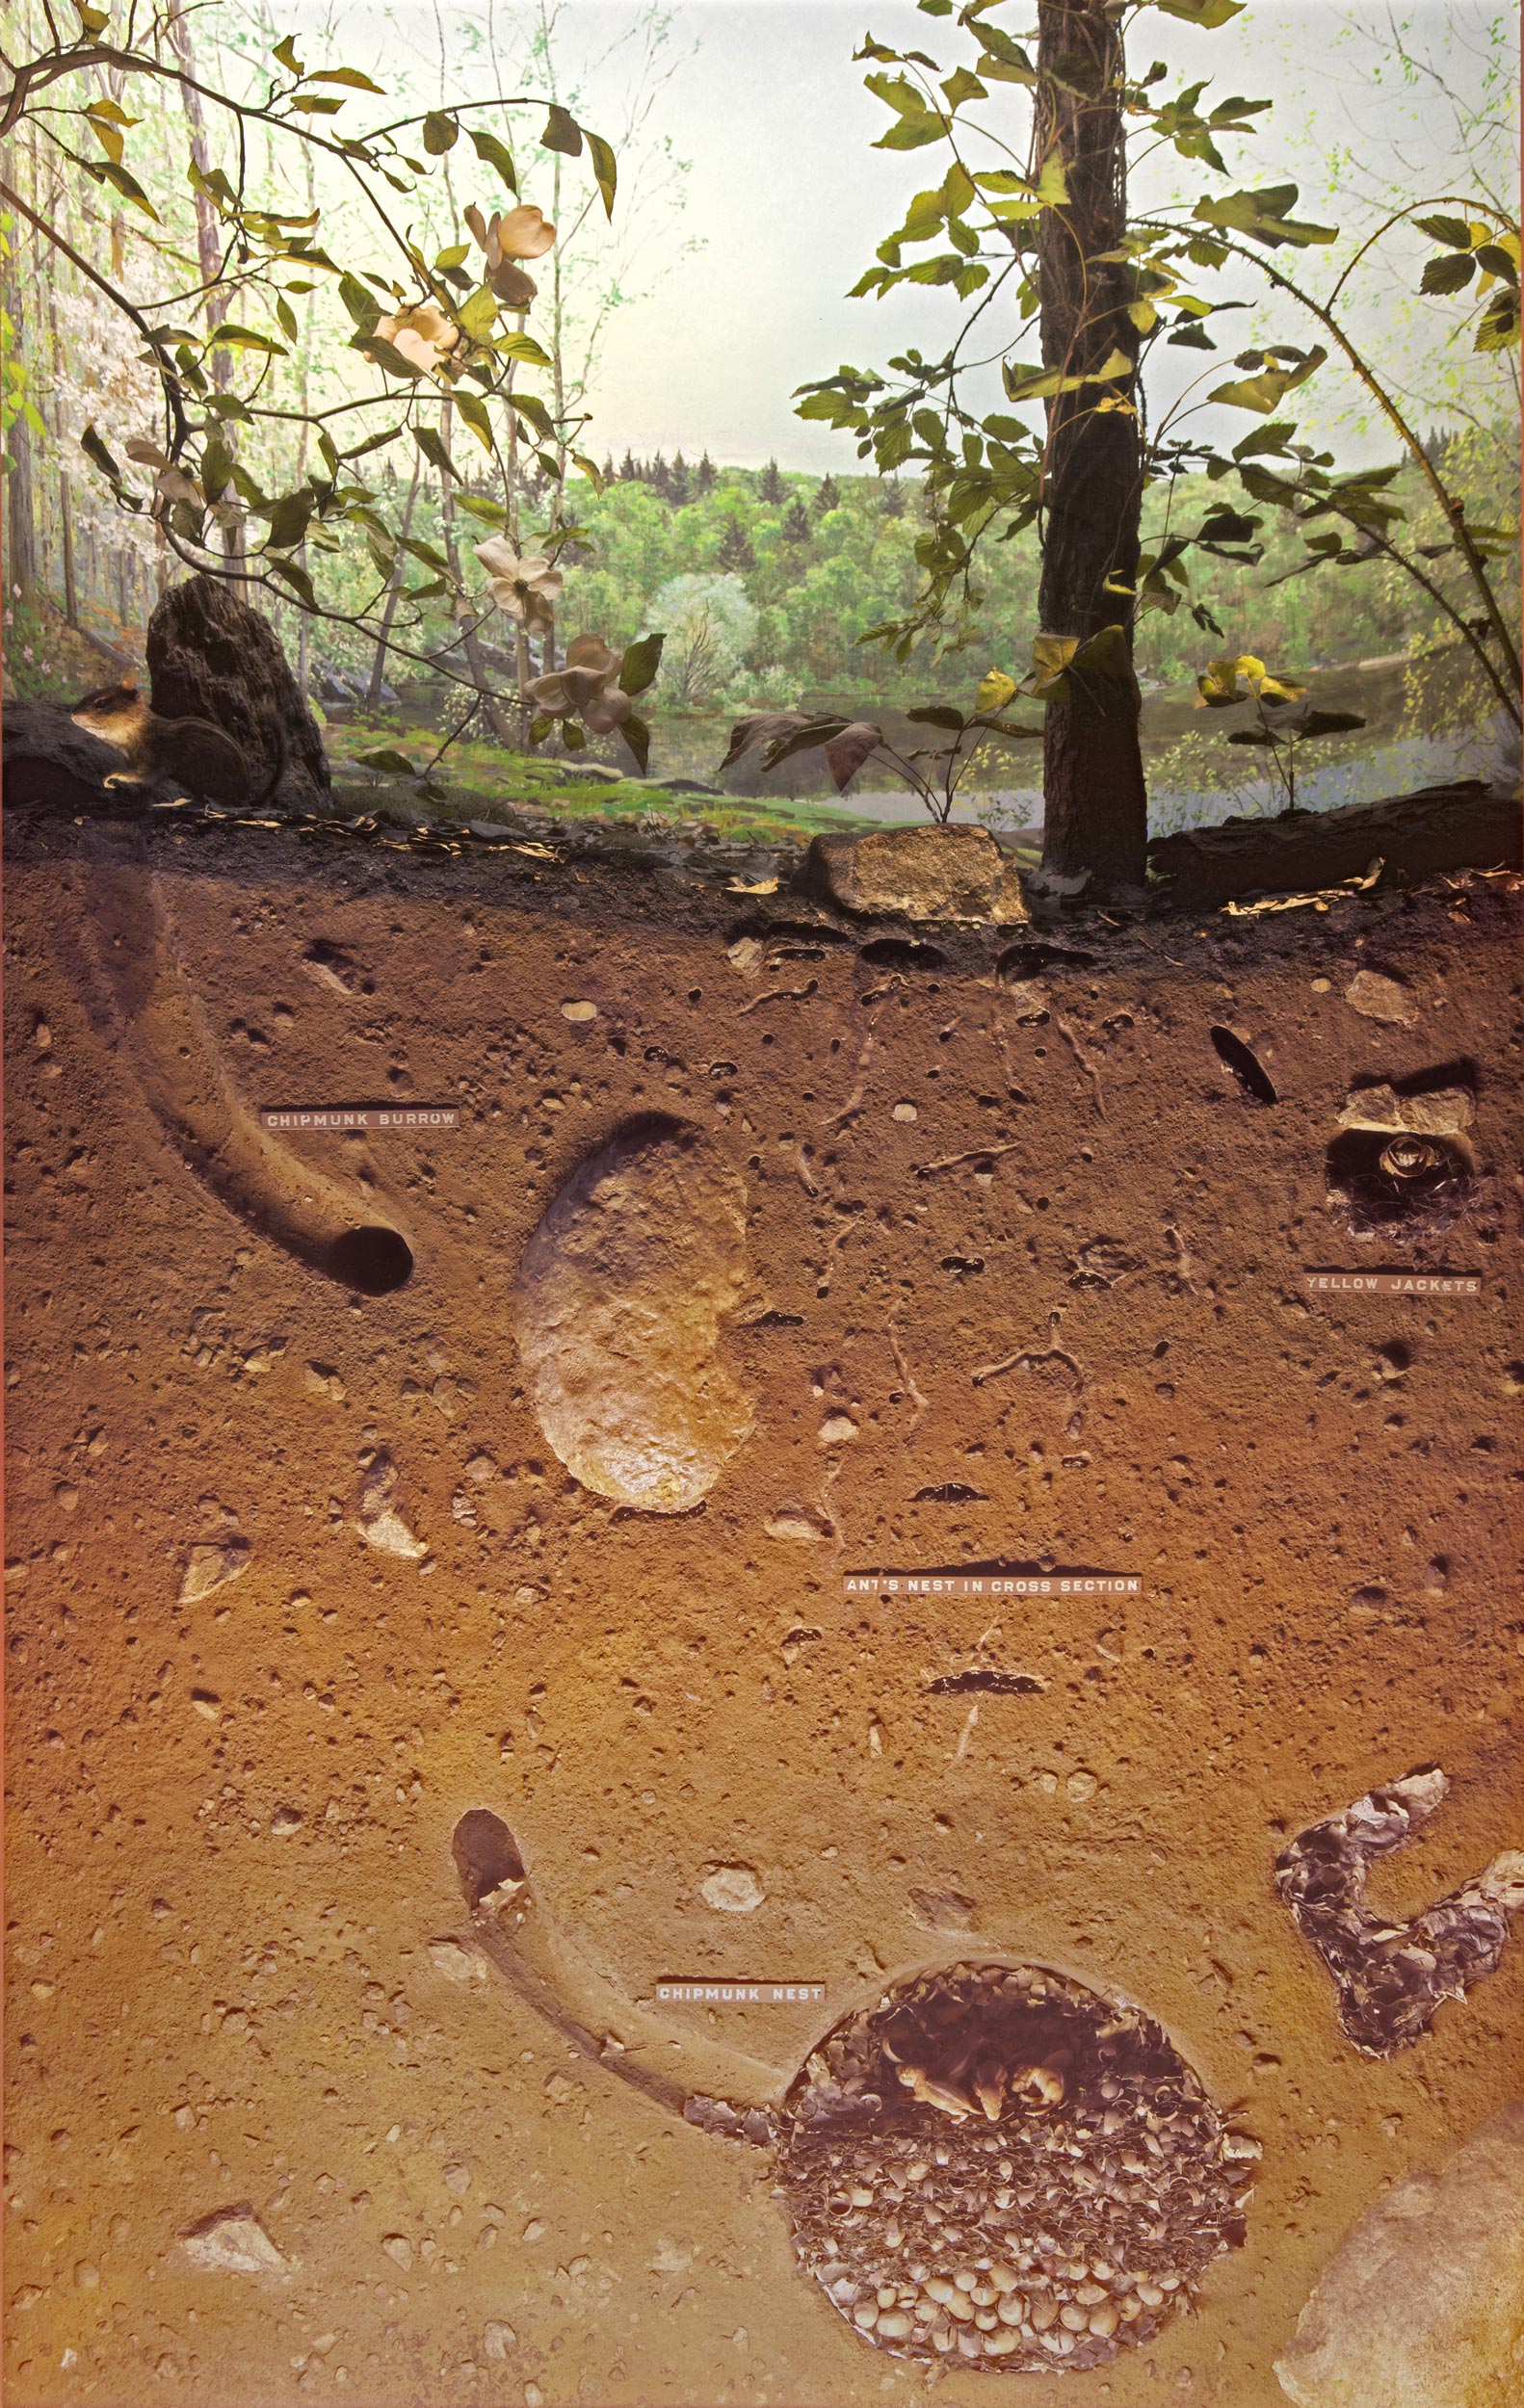 Diorama showing the landscape and cross section of the soil of the woodland during the spring season.